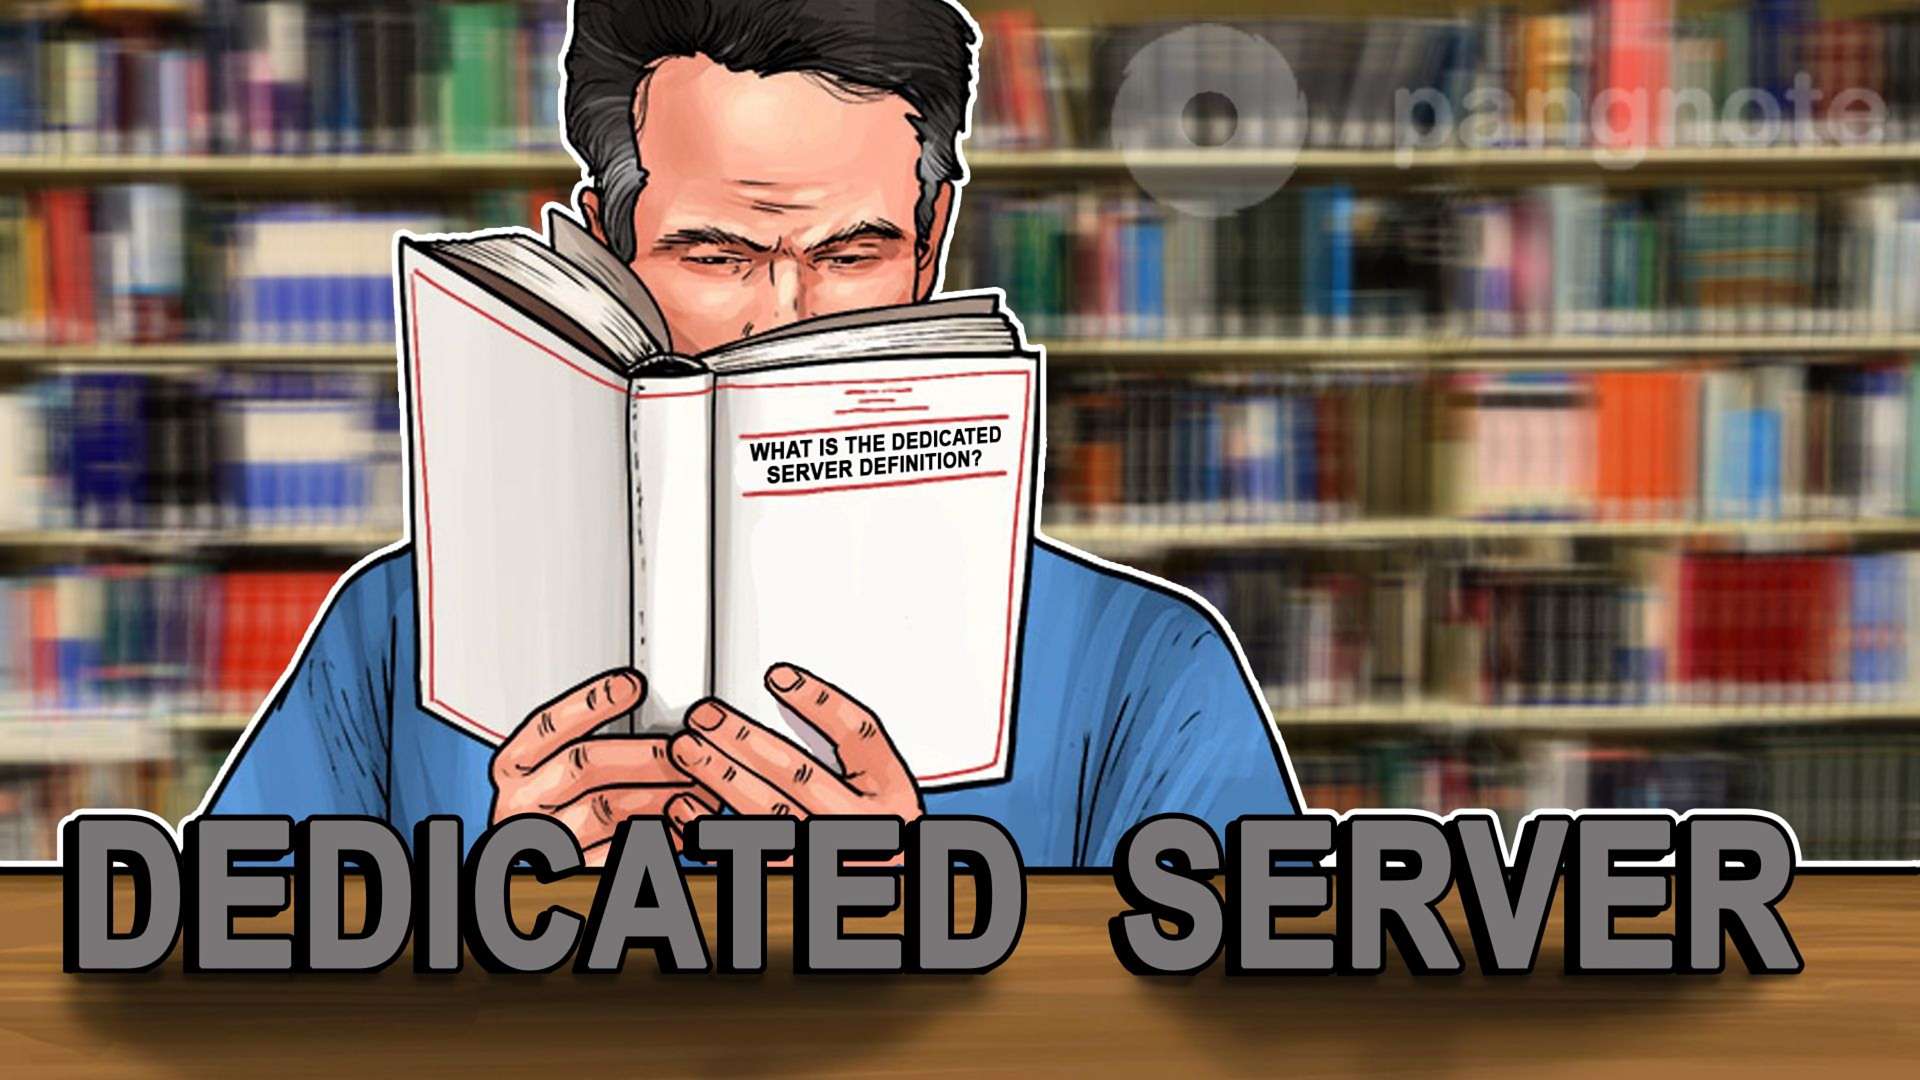 What are the special issues and what is the dedicated server definition?